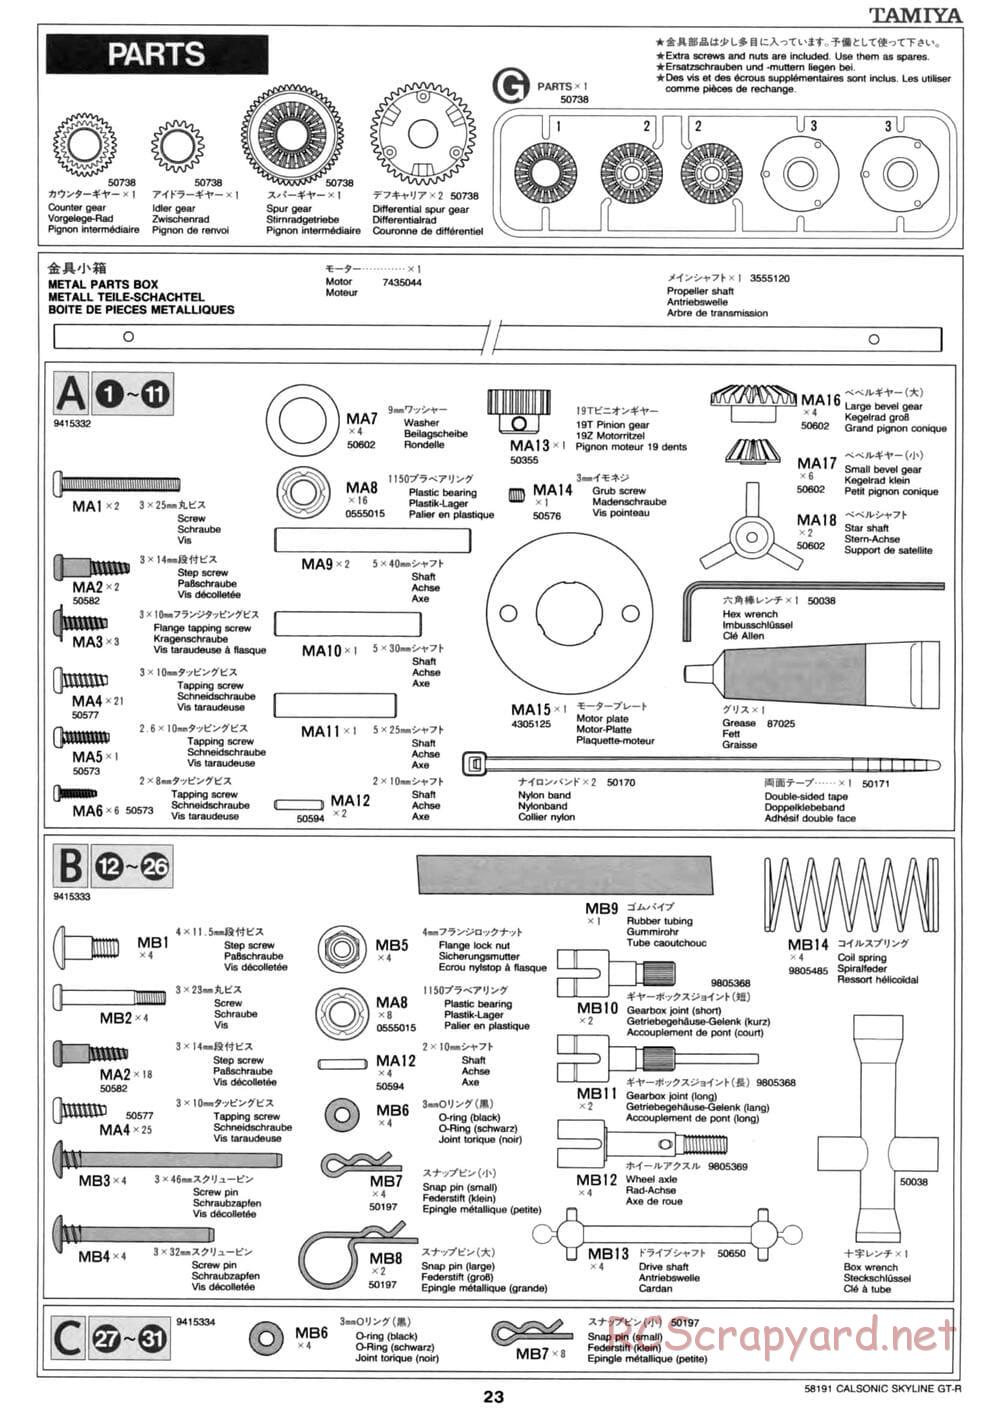 Tamiya - Calsonic Skyline GT-R - TL-01 Chassis - Manual - Page 23